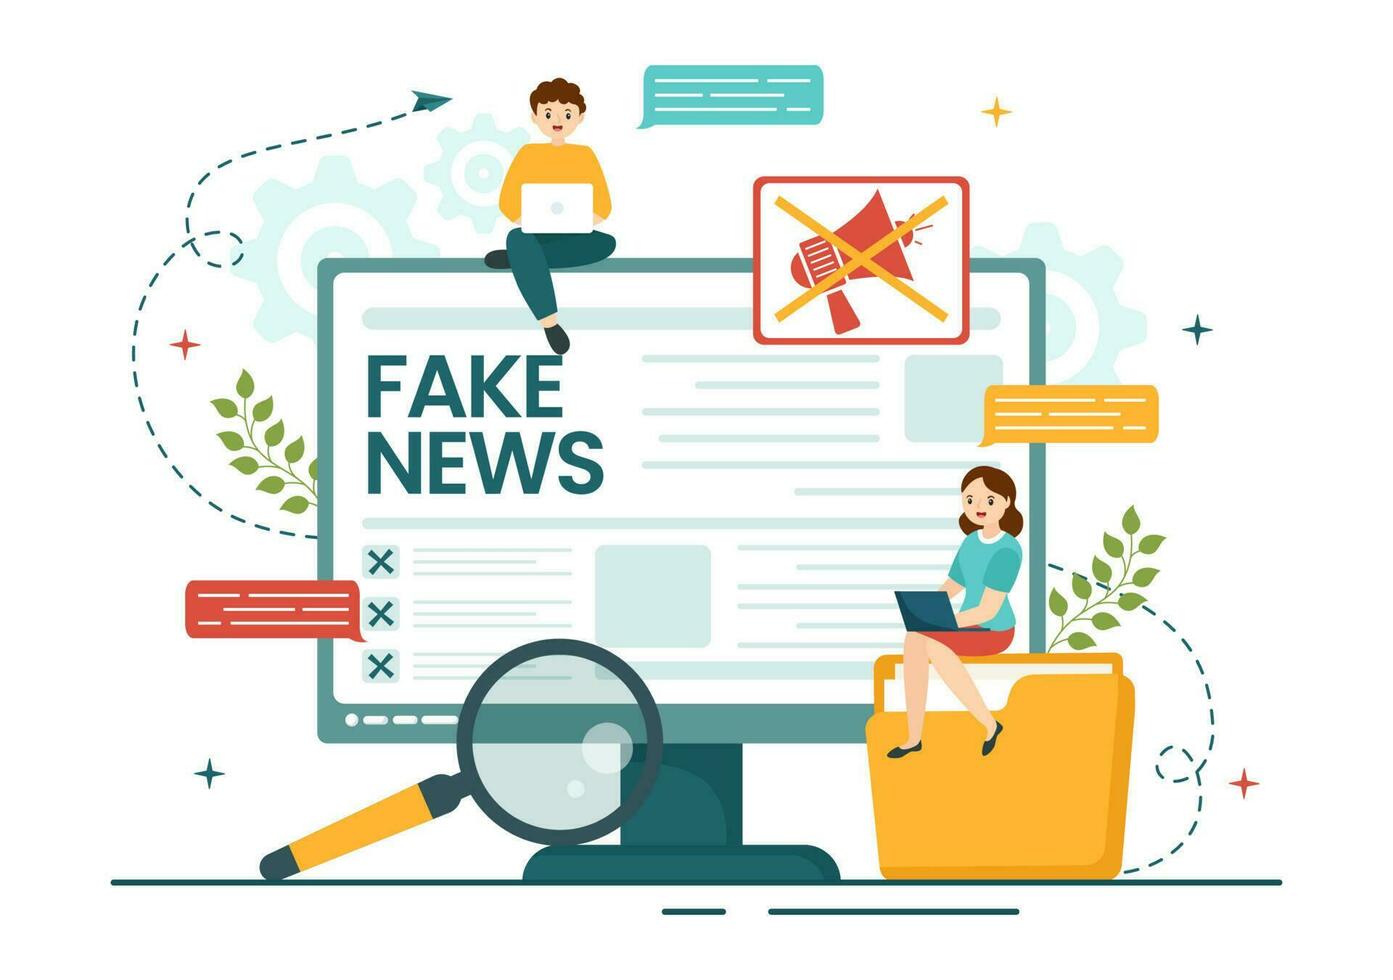 Fact Check Vector Illustration With Myths vs Facts News for Thorough ...